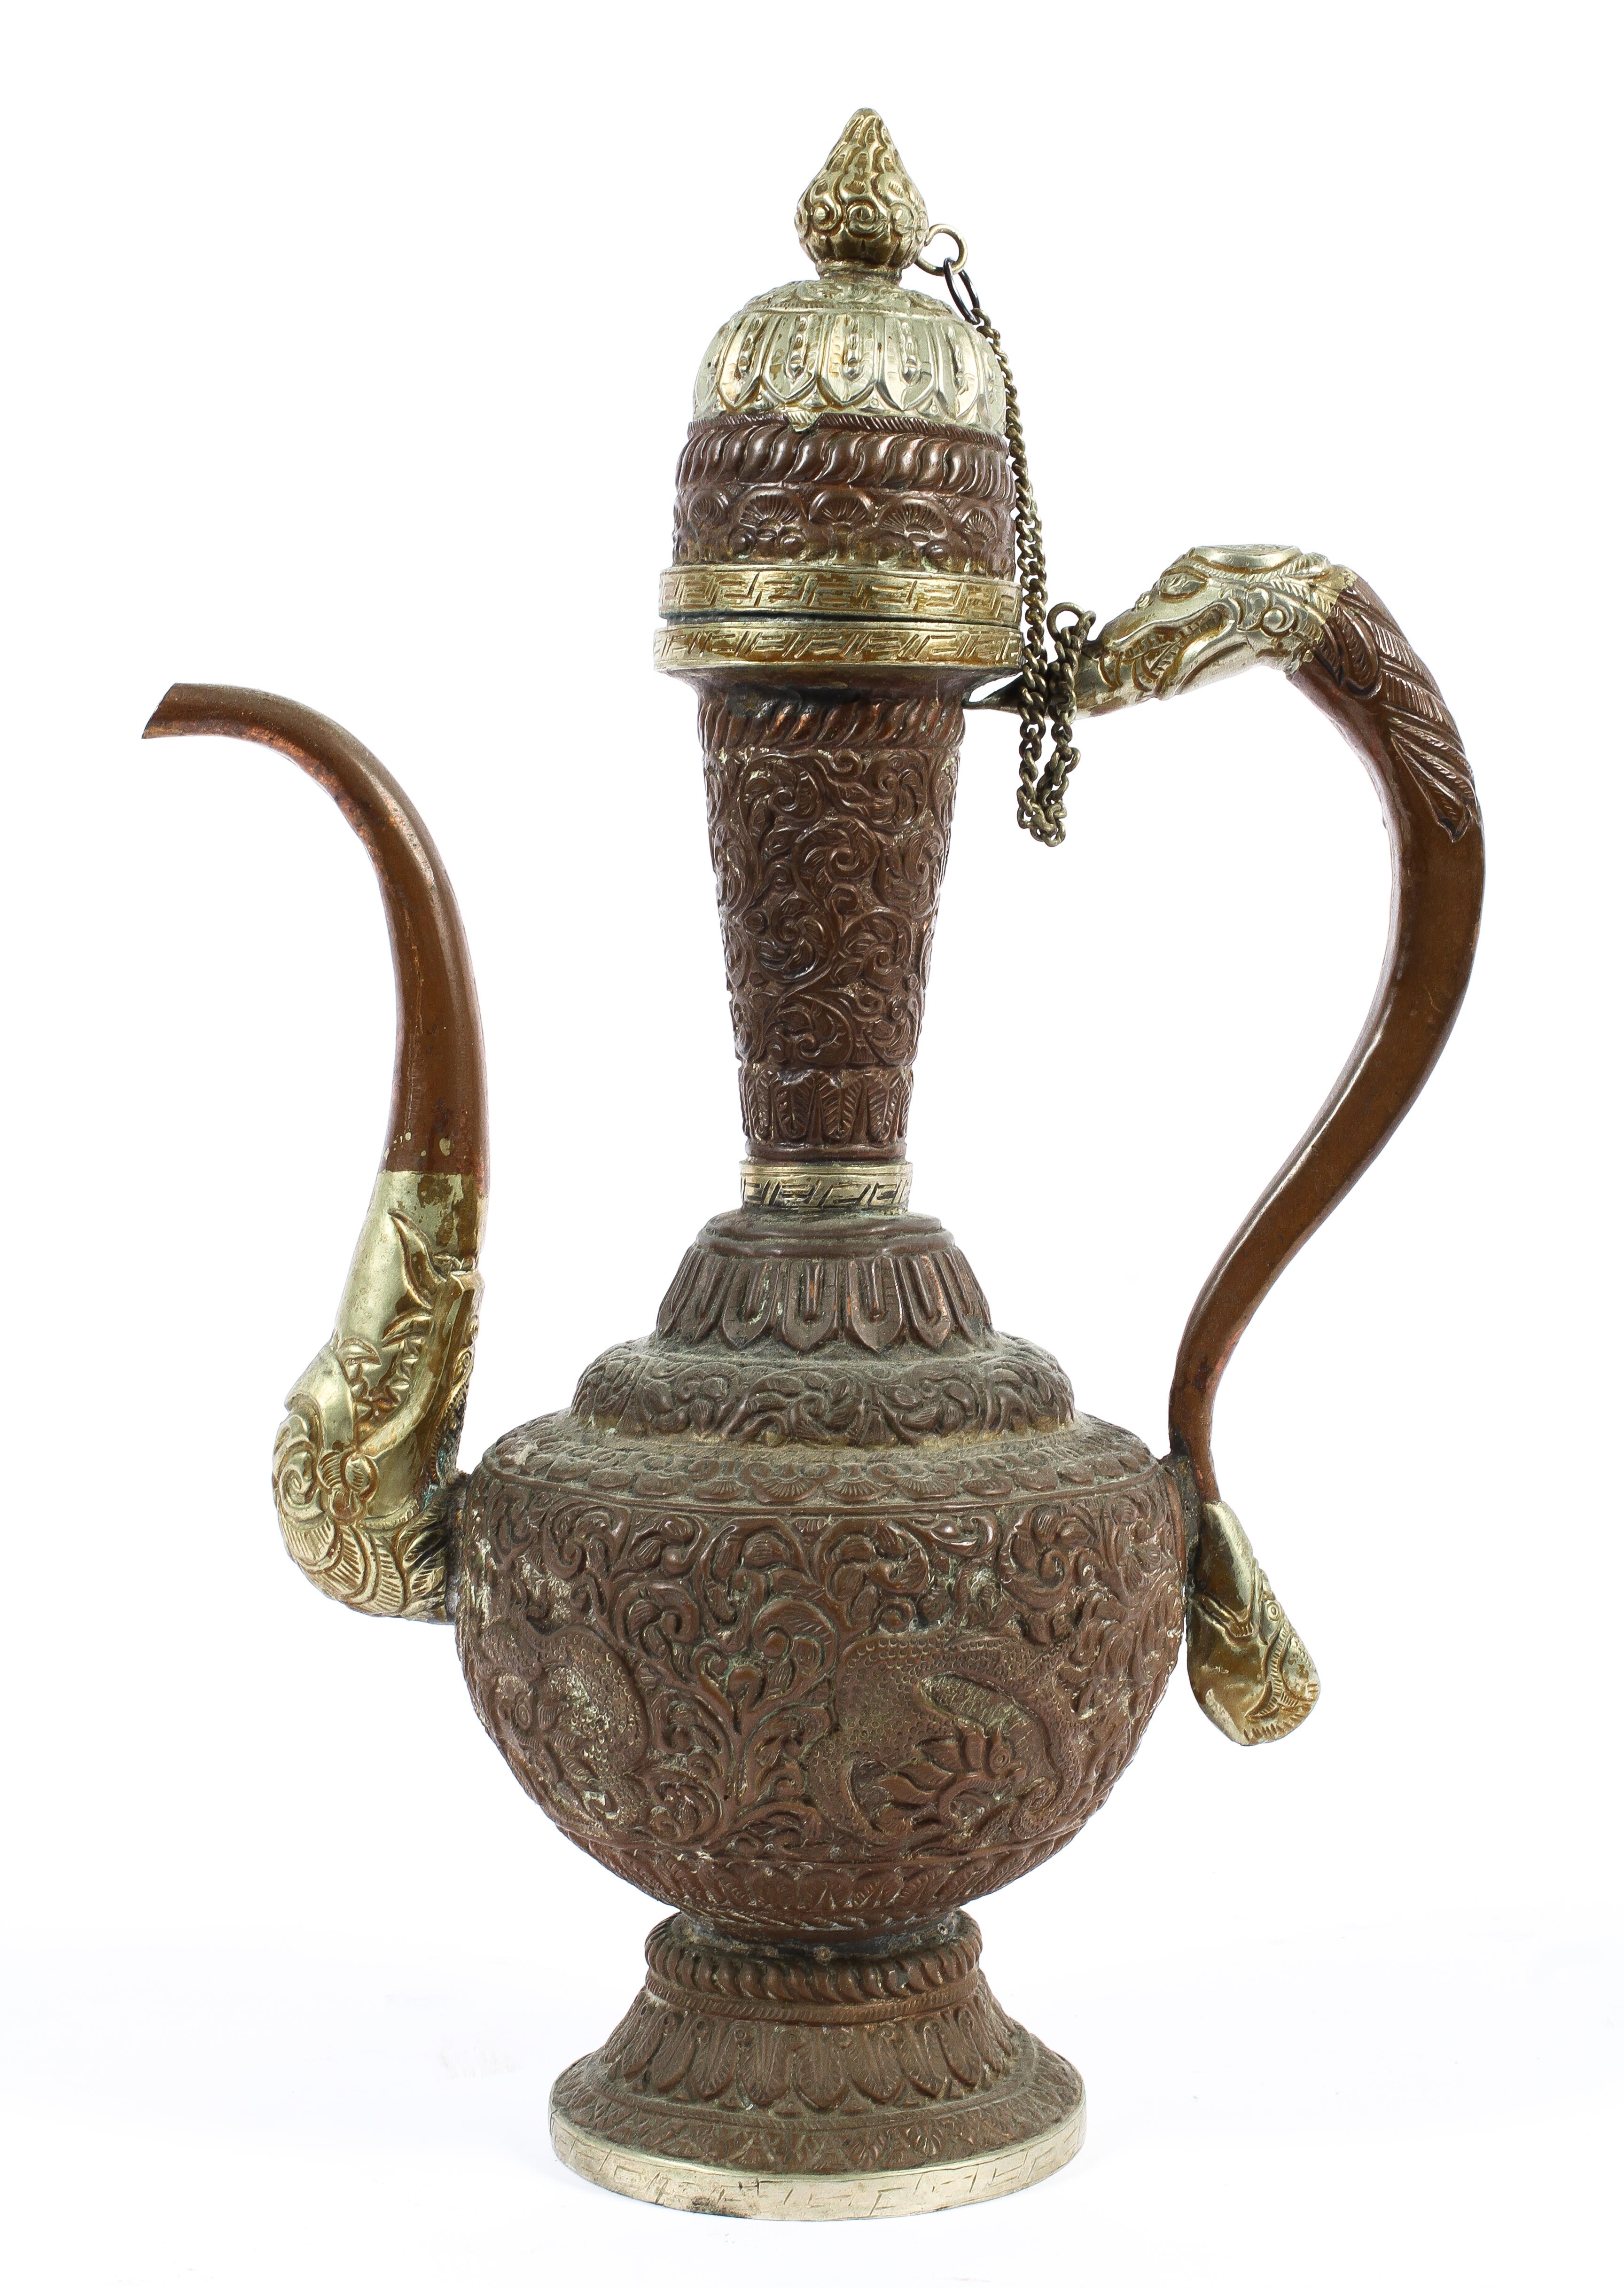 A mixed metal Turkish style coffee pot with cast and chased decoration,